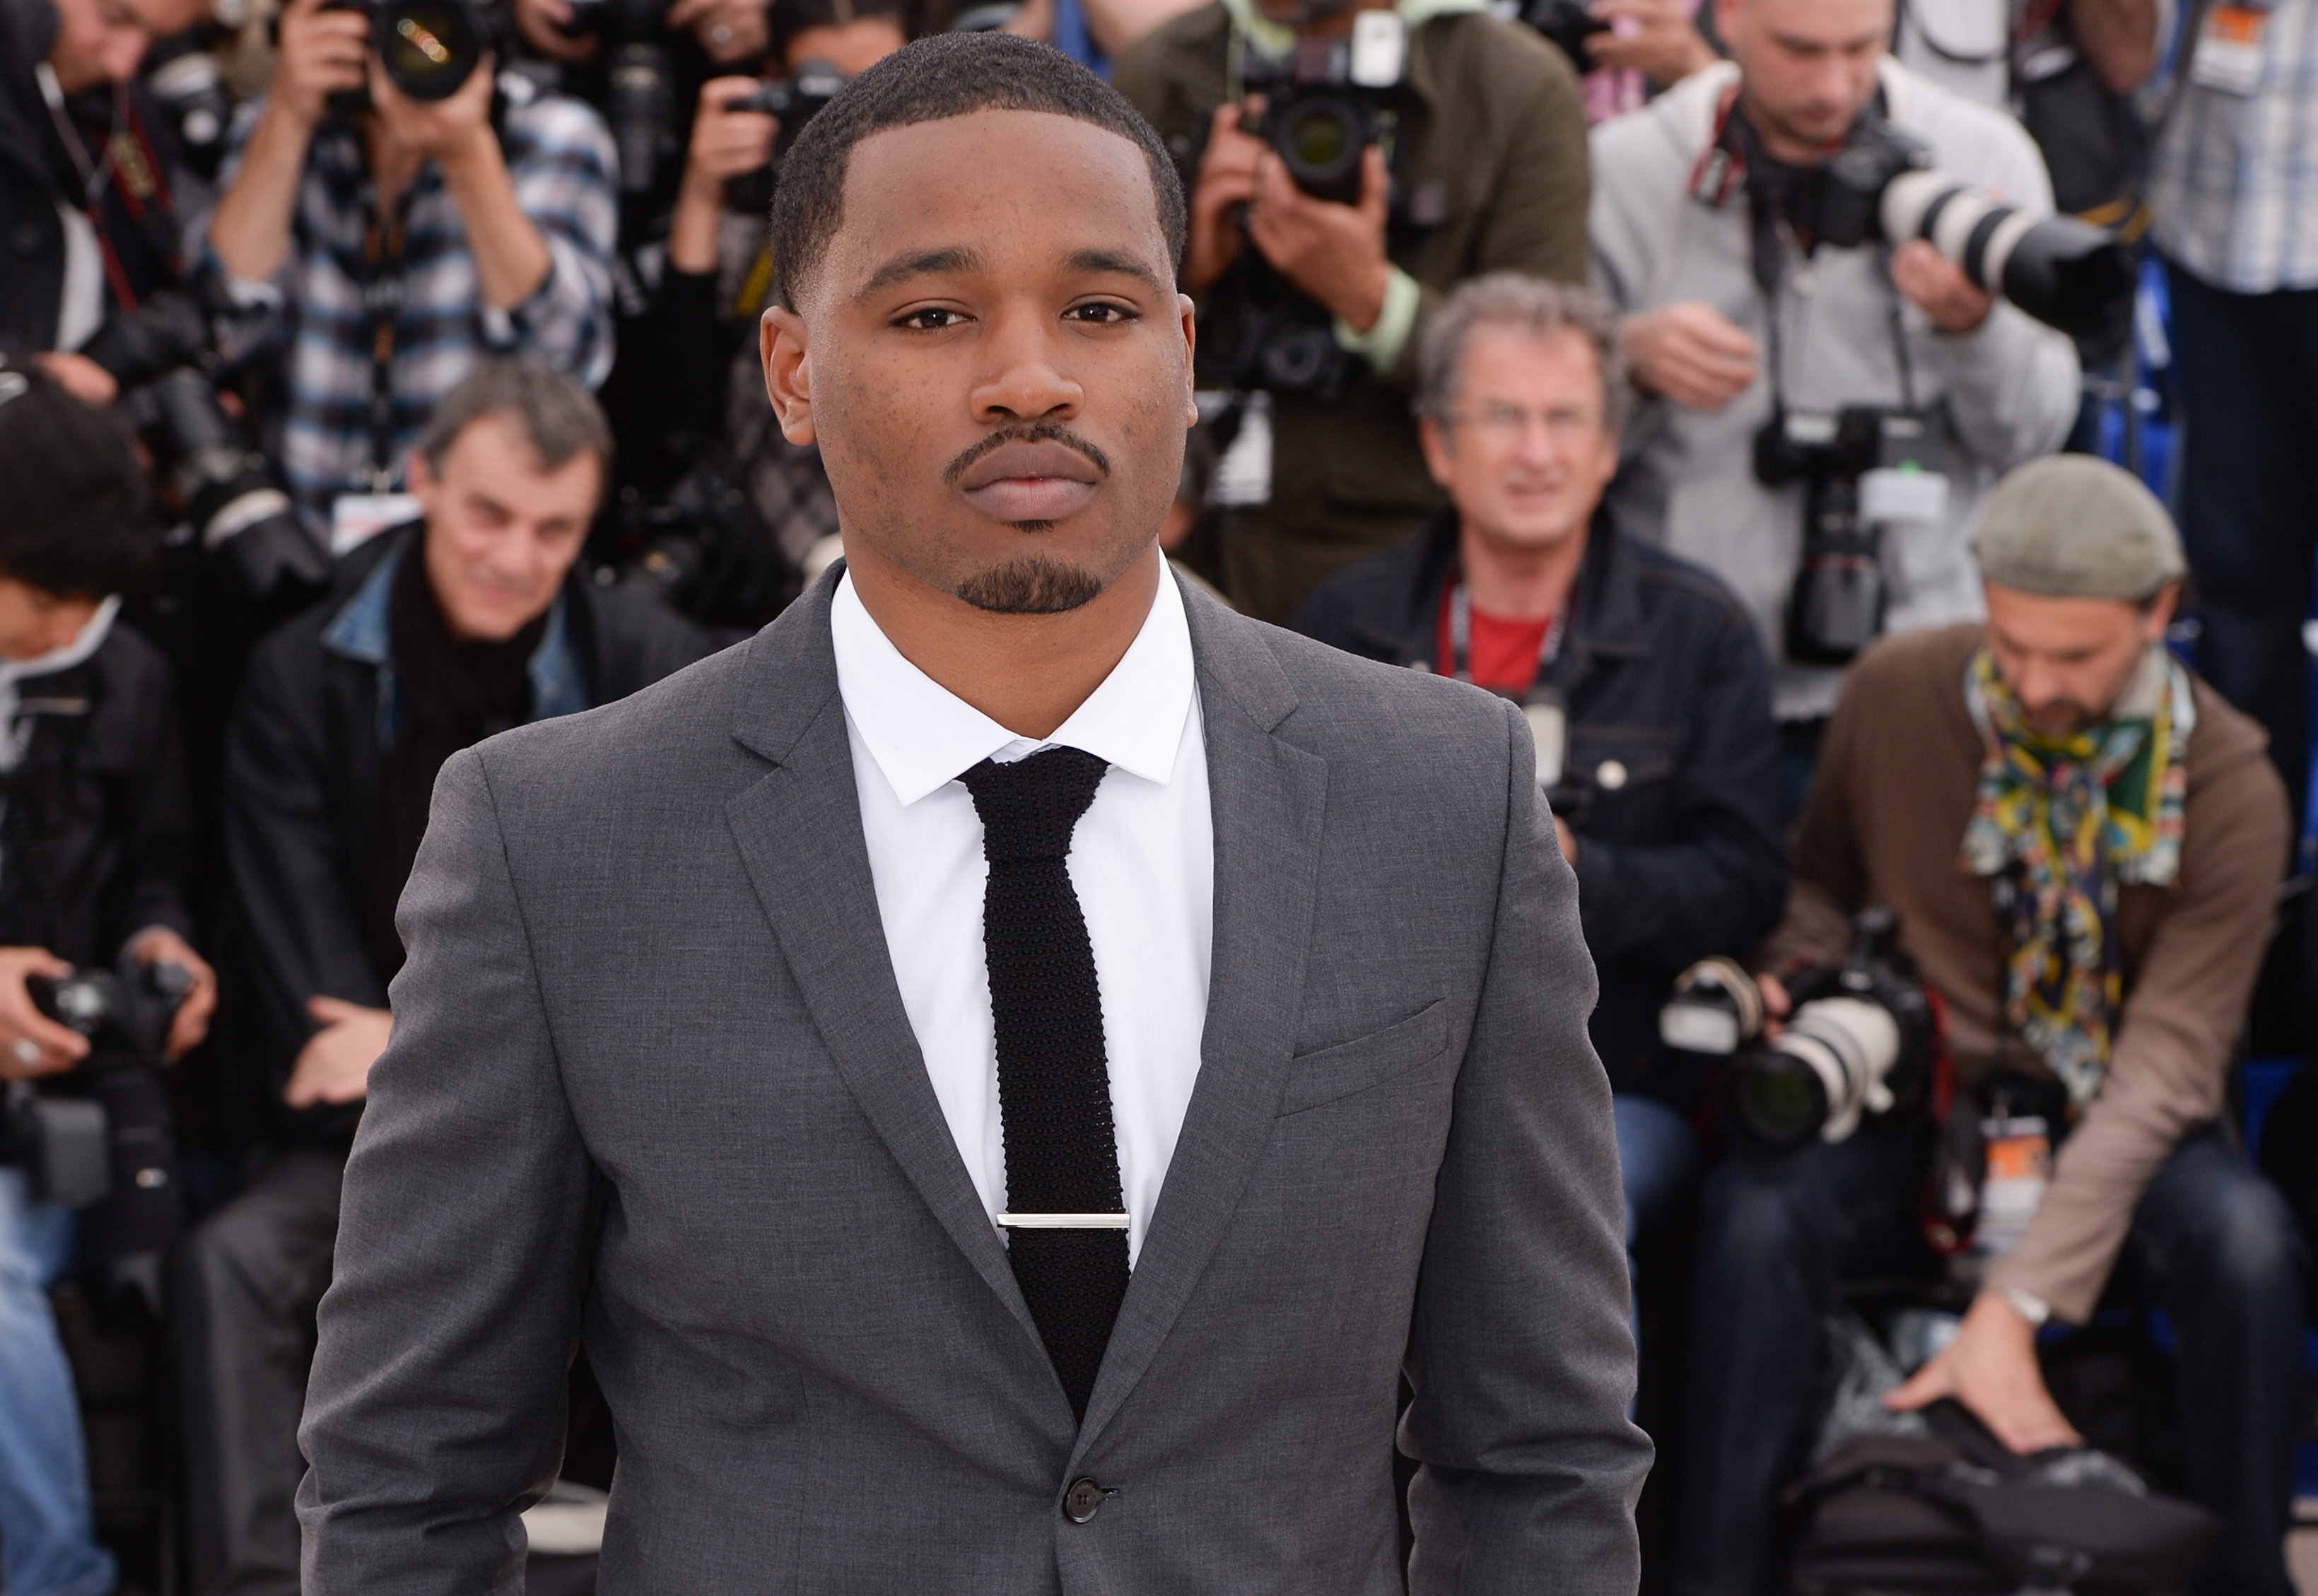 Ryan Coogler at the Fruitvale Station photo call during the 66th Cannes International Film Festival